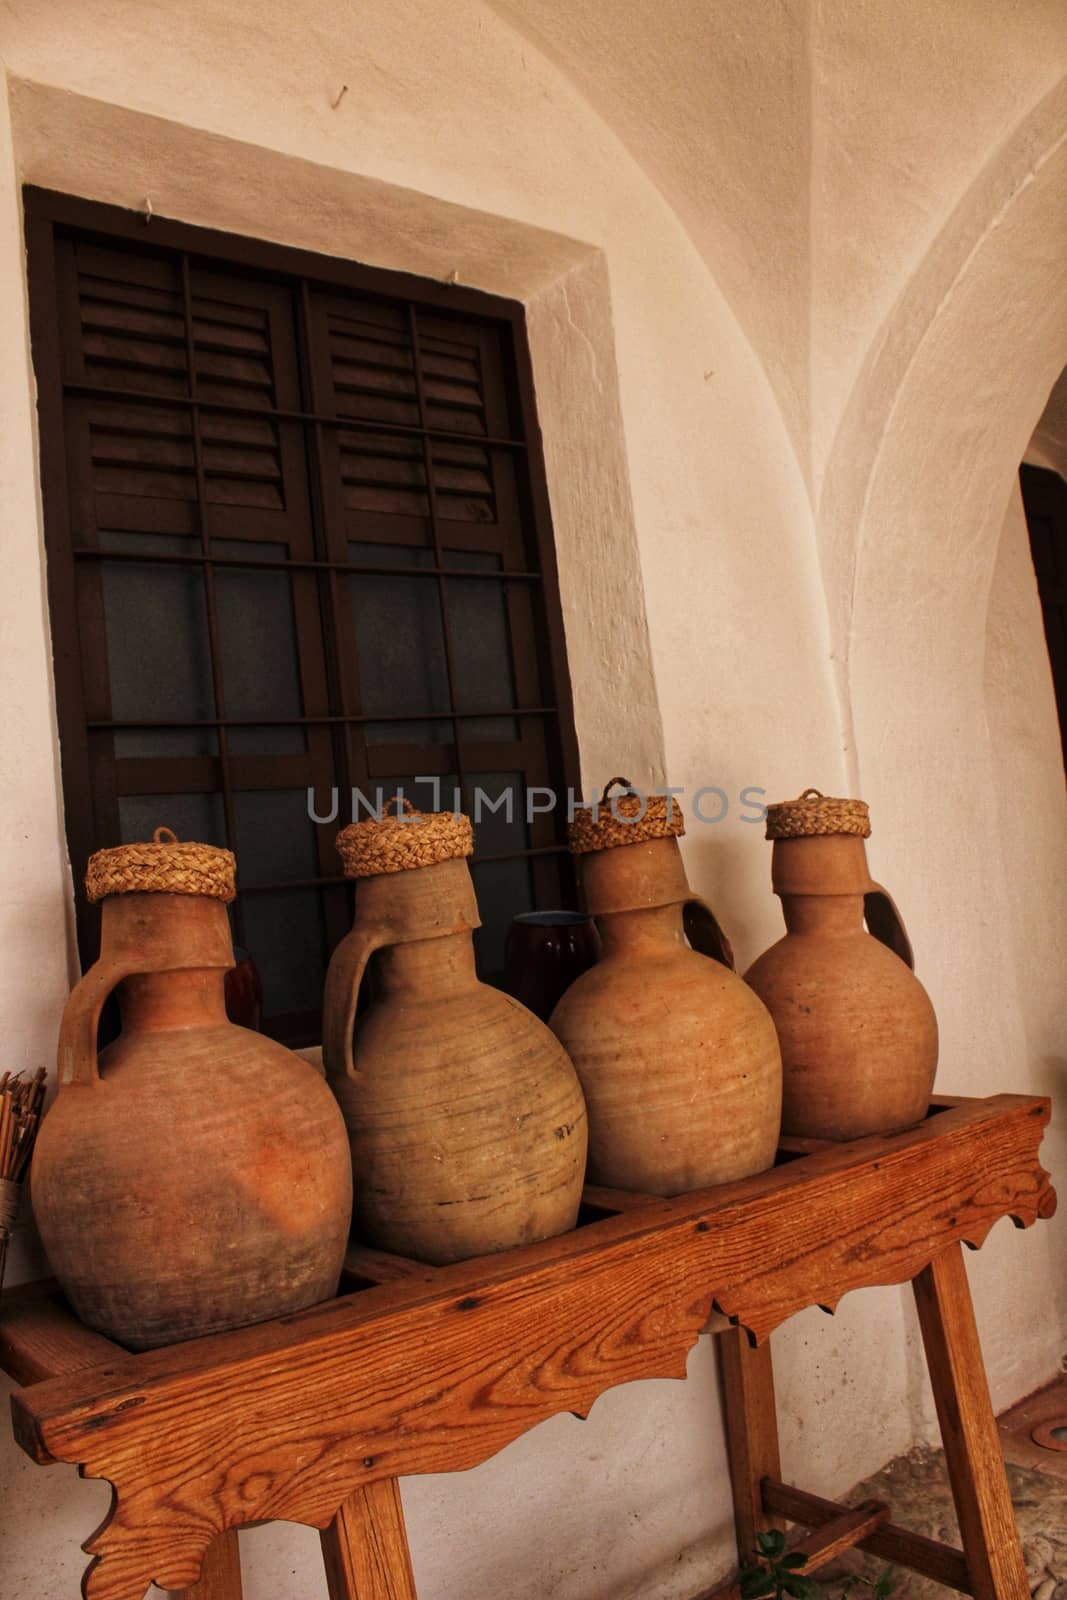 Clay pots for water in a typical courtyard of a Spanish house in Castile-la Mancha